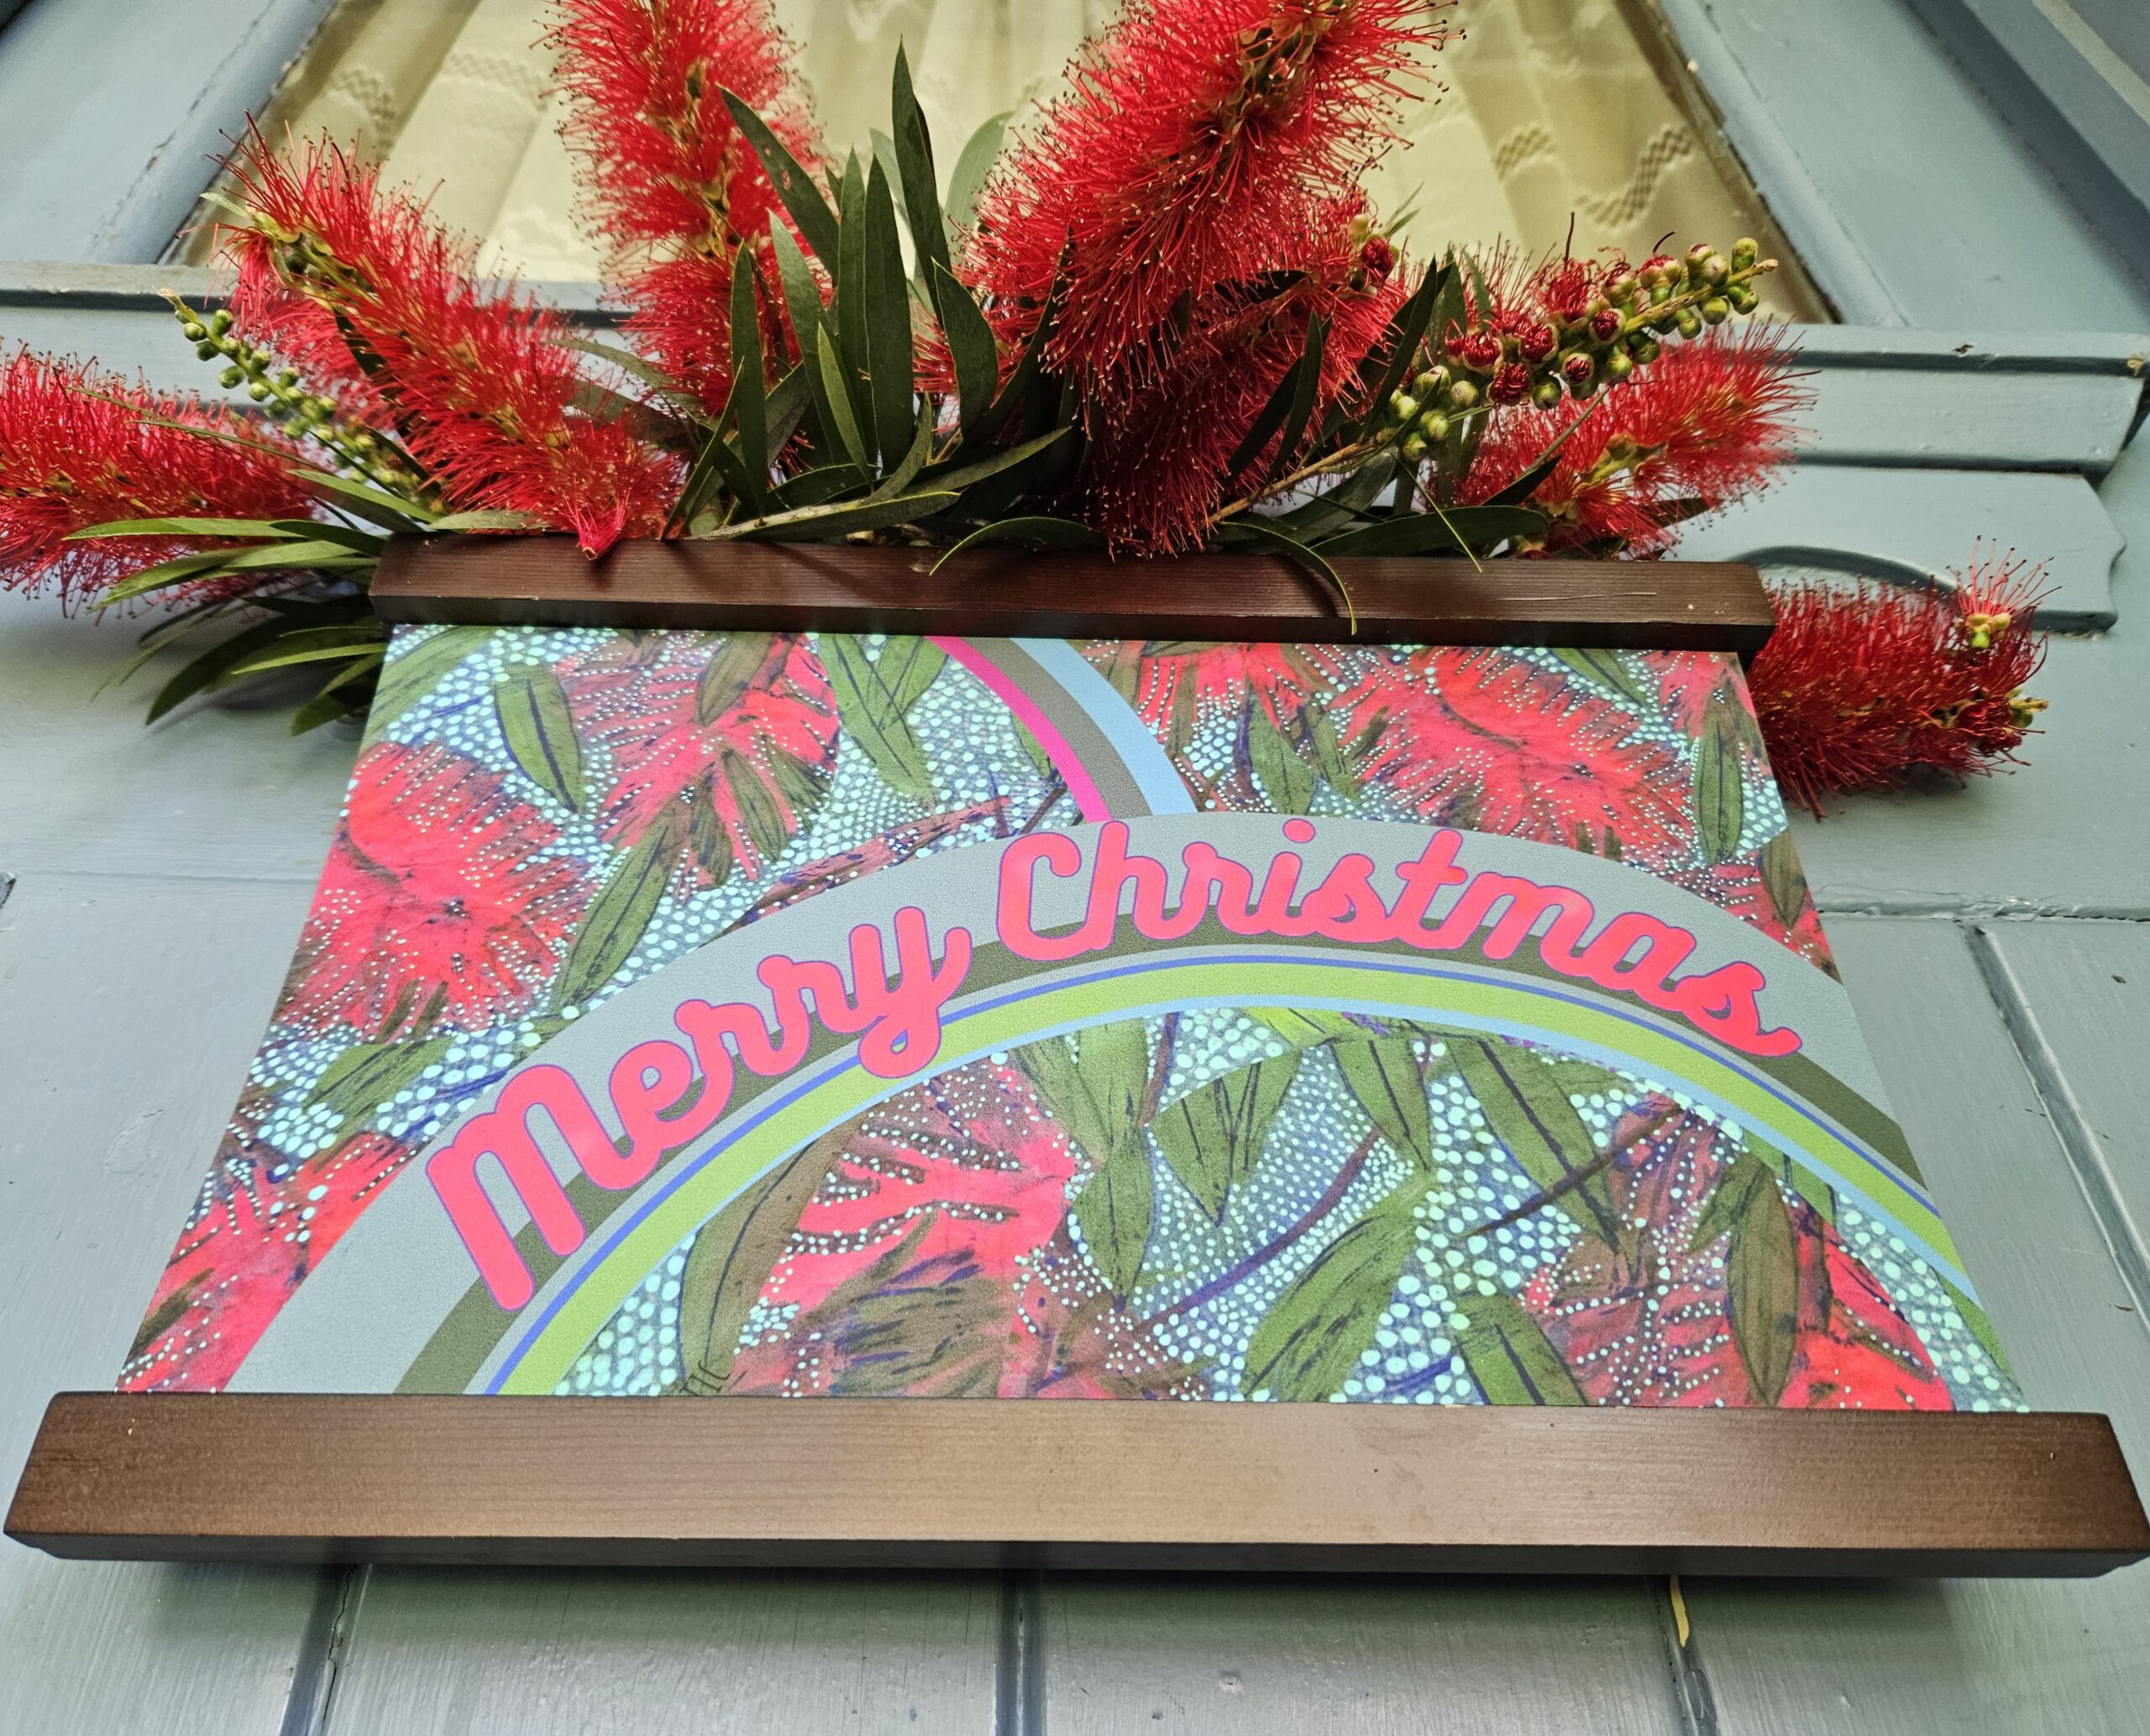 a Merry Christmas welcome door hanger poster, with red cursive writing and Australian Bottlebrush design, decorated with bottlebrush flowers